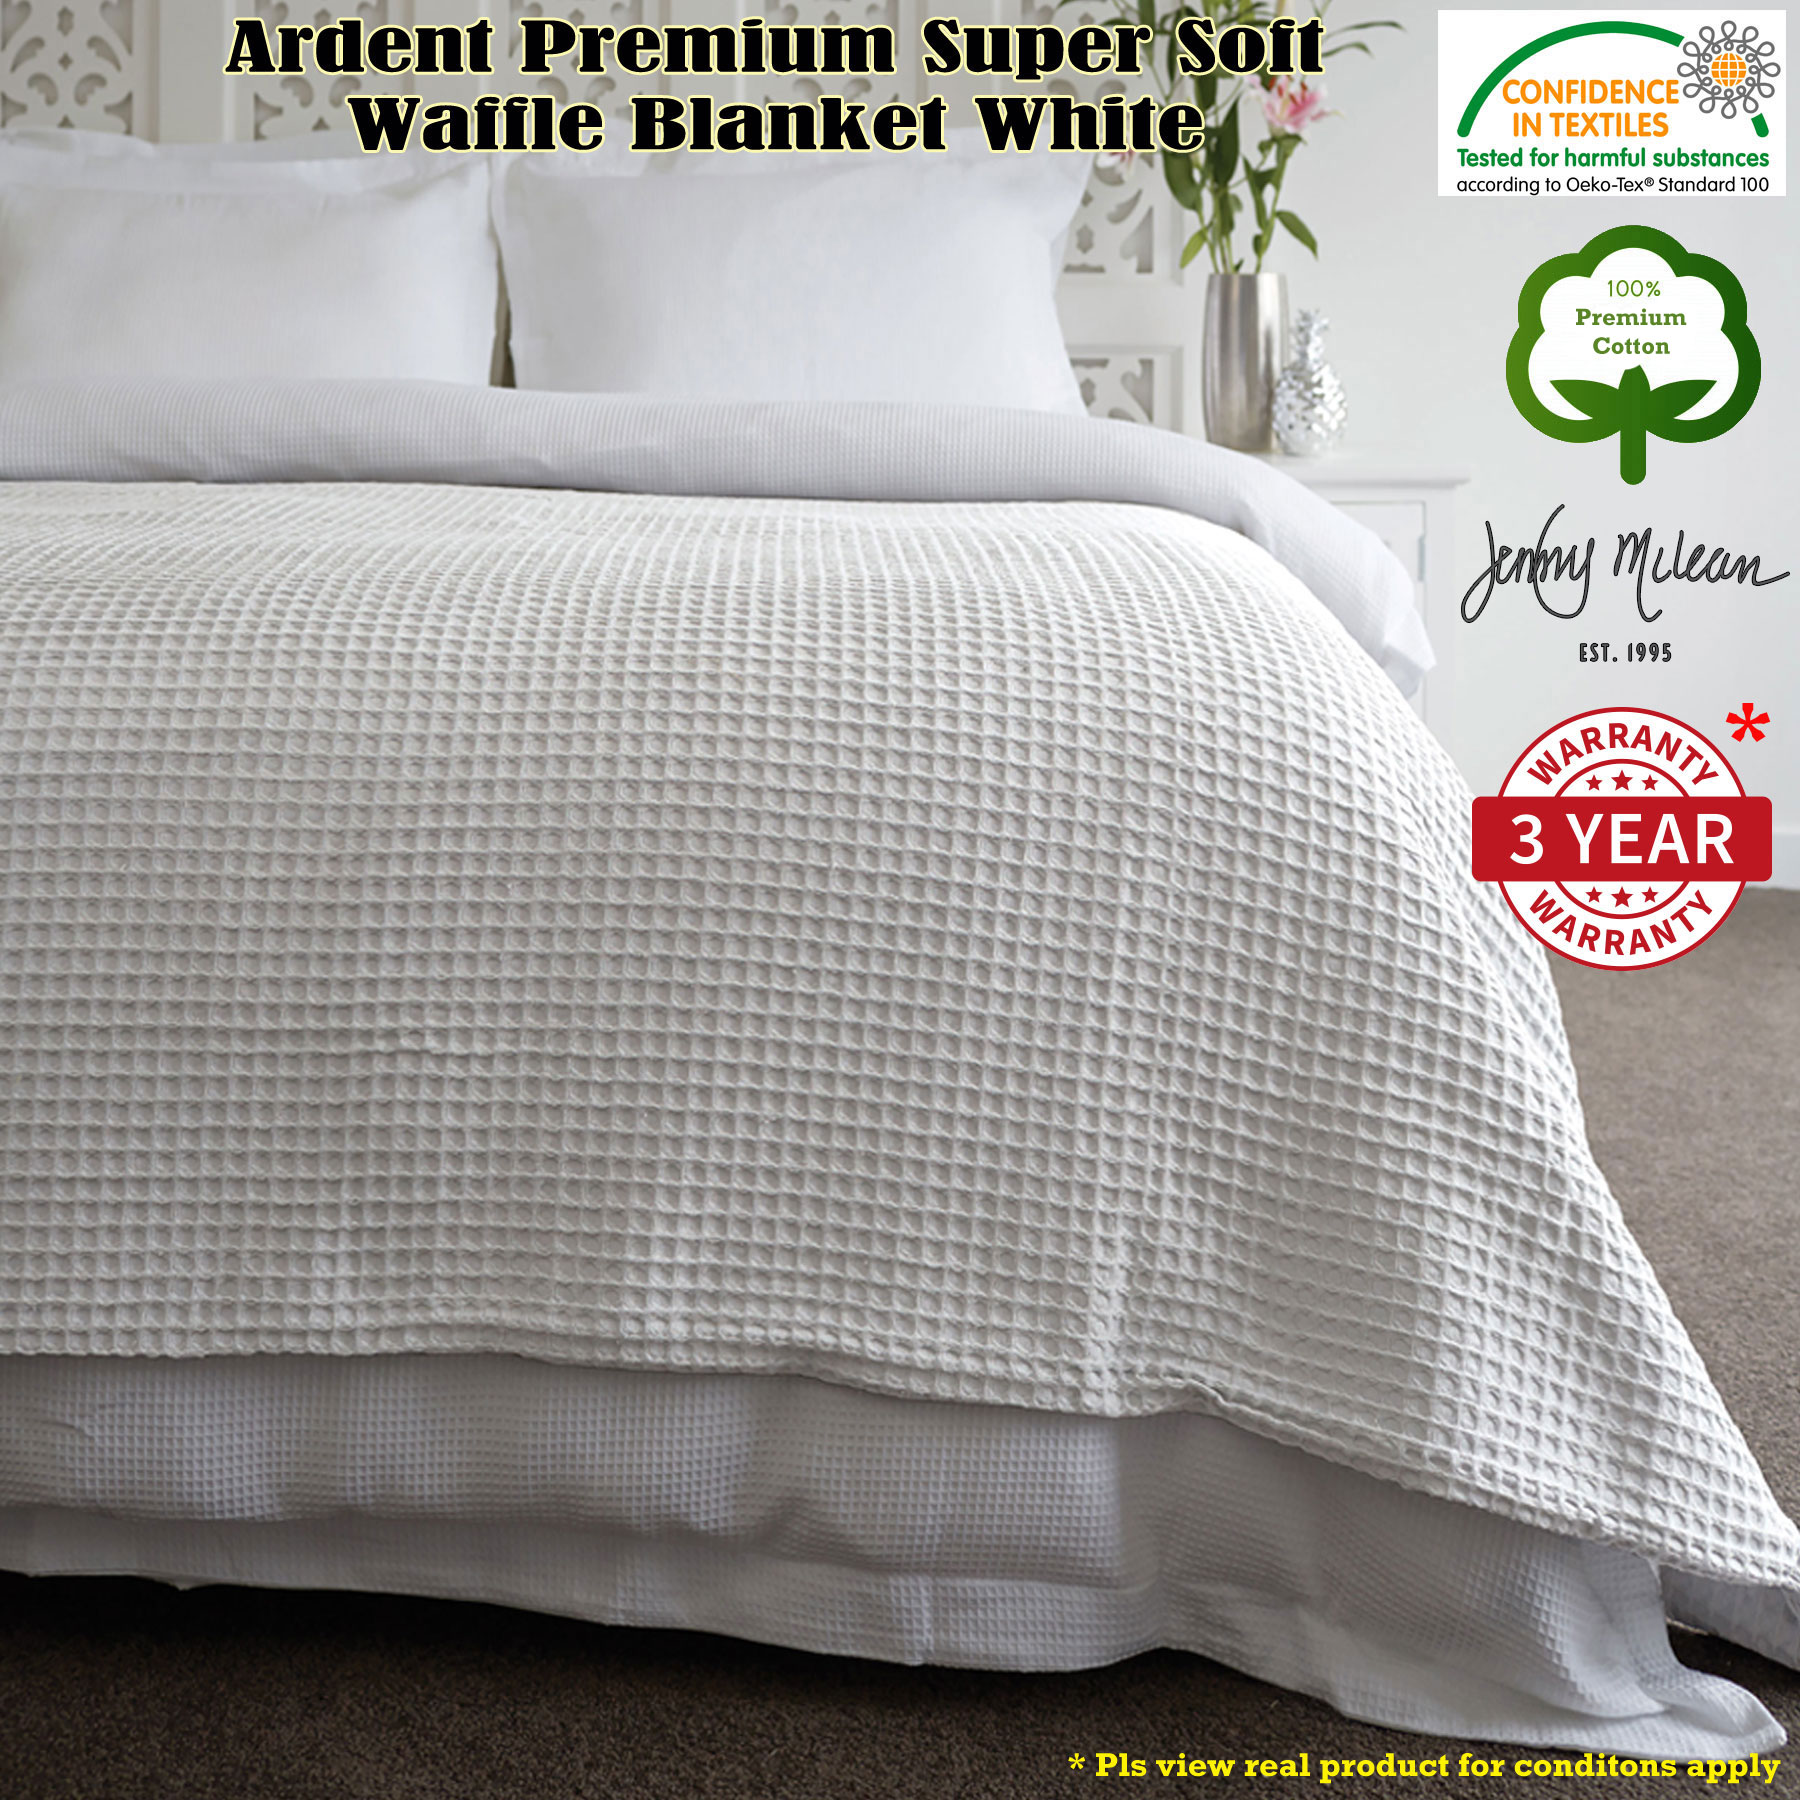 WHITE Premium Super Soft Pure Cotton WAFFLE Blanket - Queen Or King / Super King